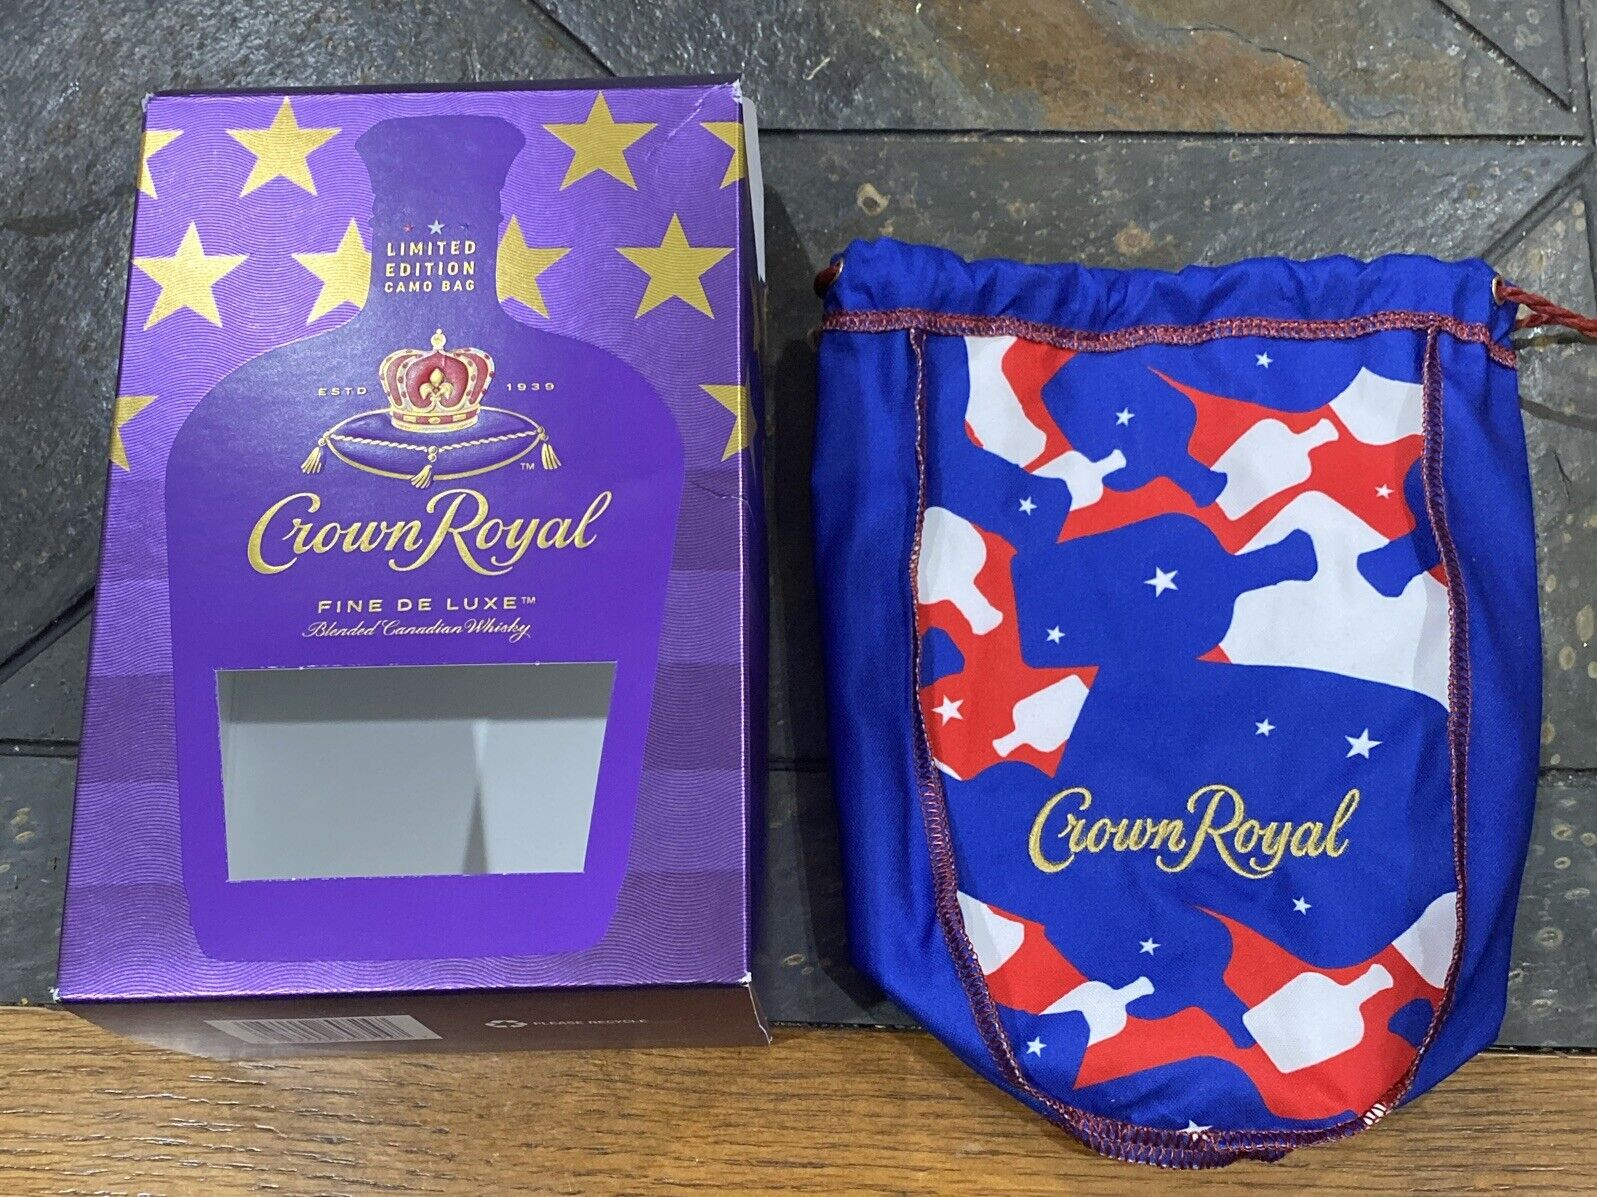 New Crown Royal Camo Limited Edition Bag Red, White & Blue Box And Bag Only